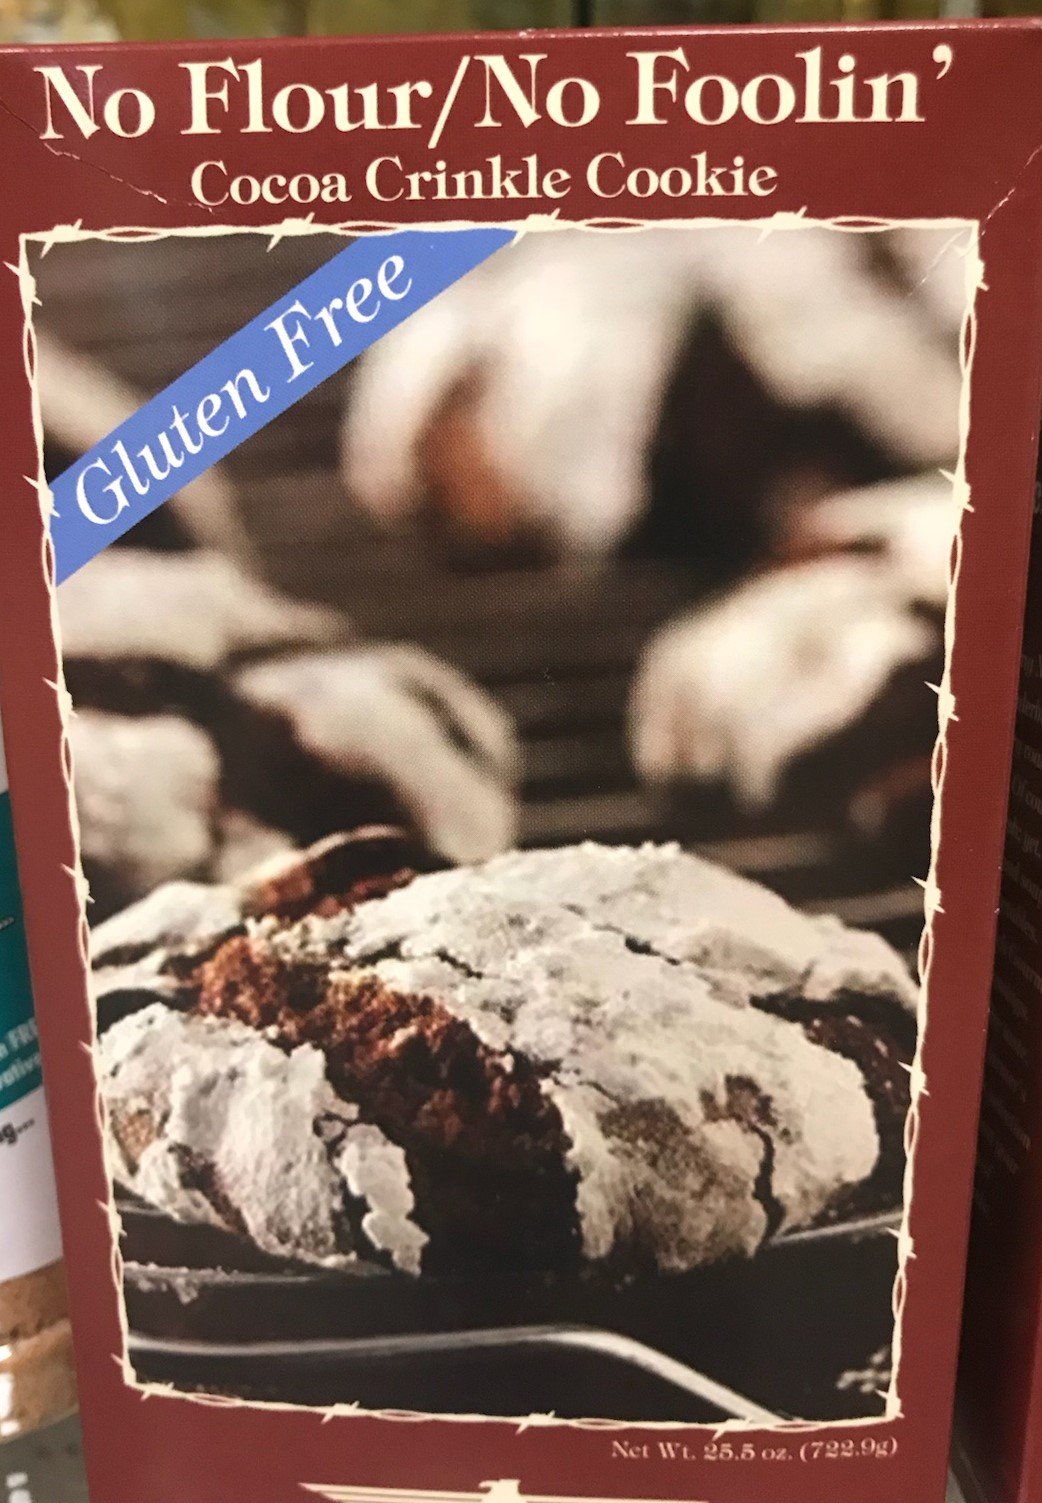 Gluten Free Cocoa Crinkle Cookies Mix